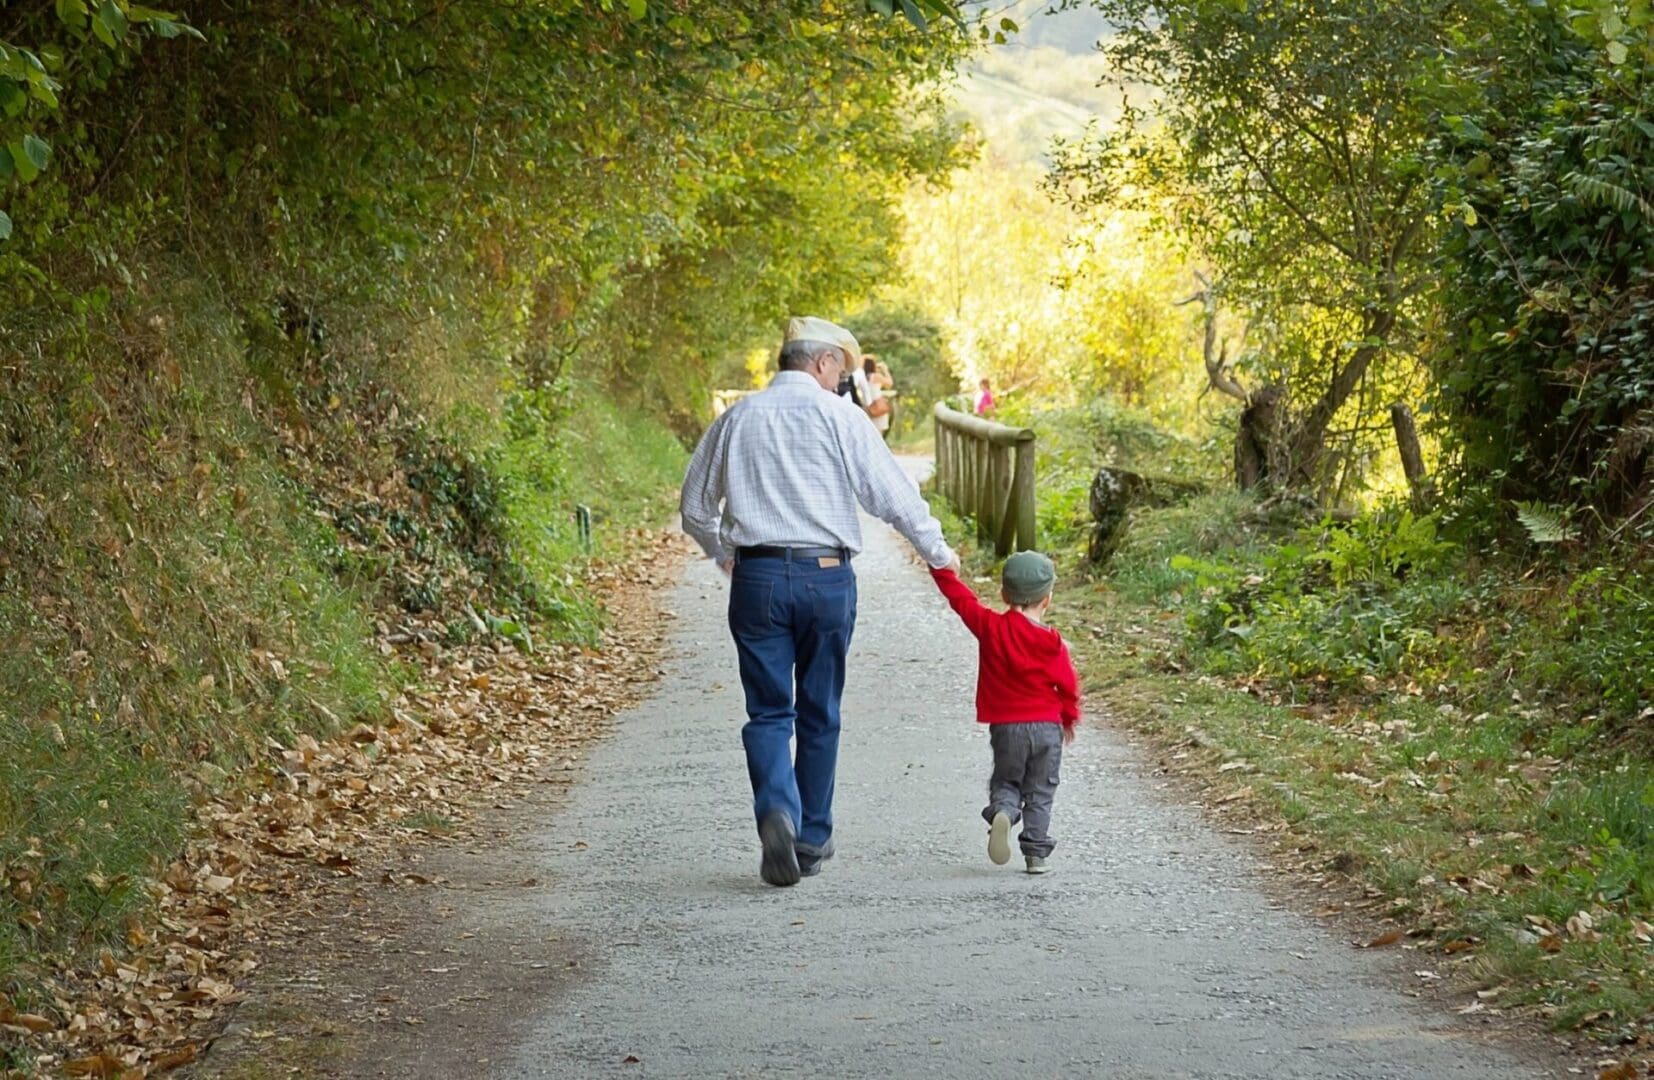 An older man and a young boy walking down a path.